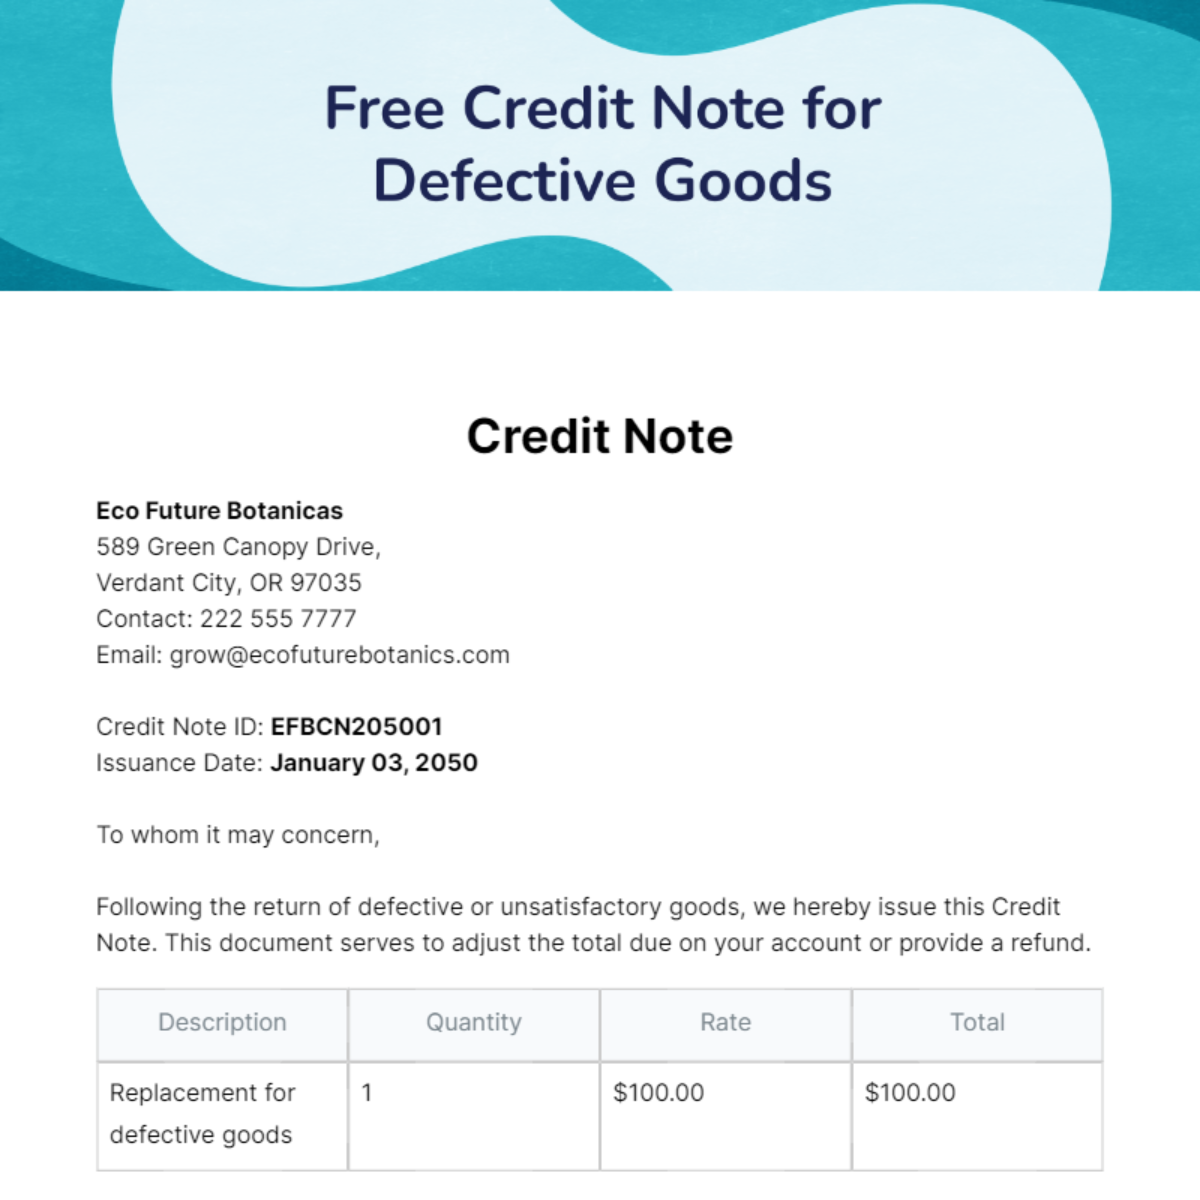 Credit Note for Defective Goods Template